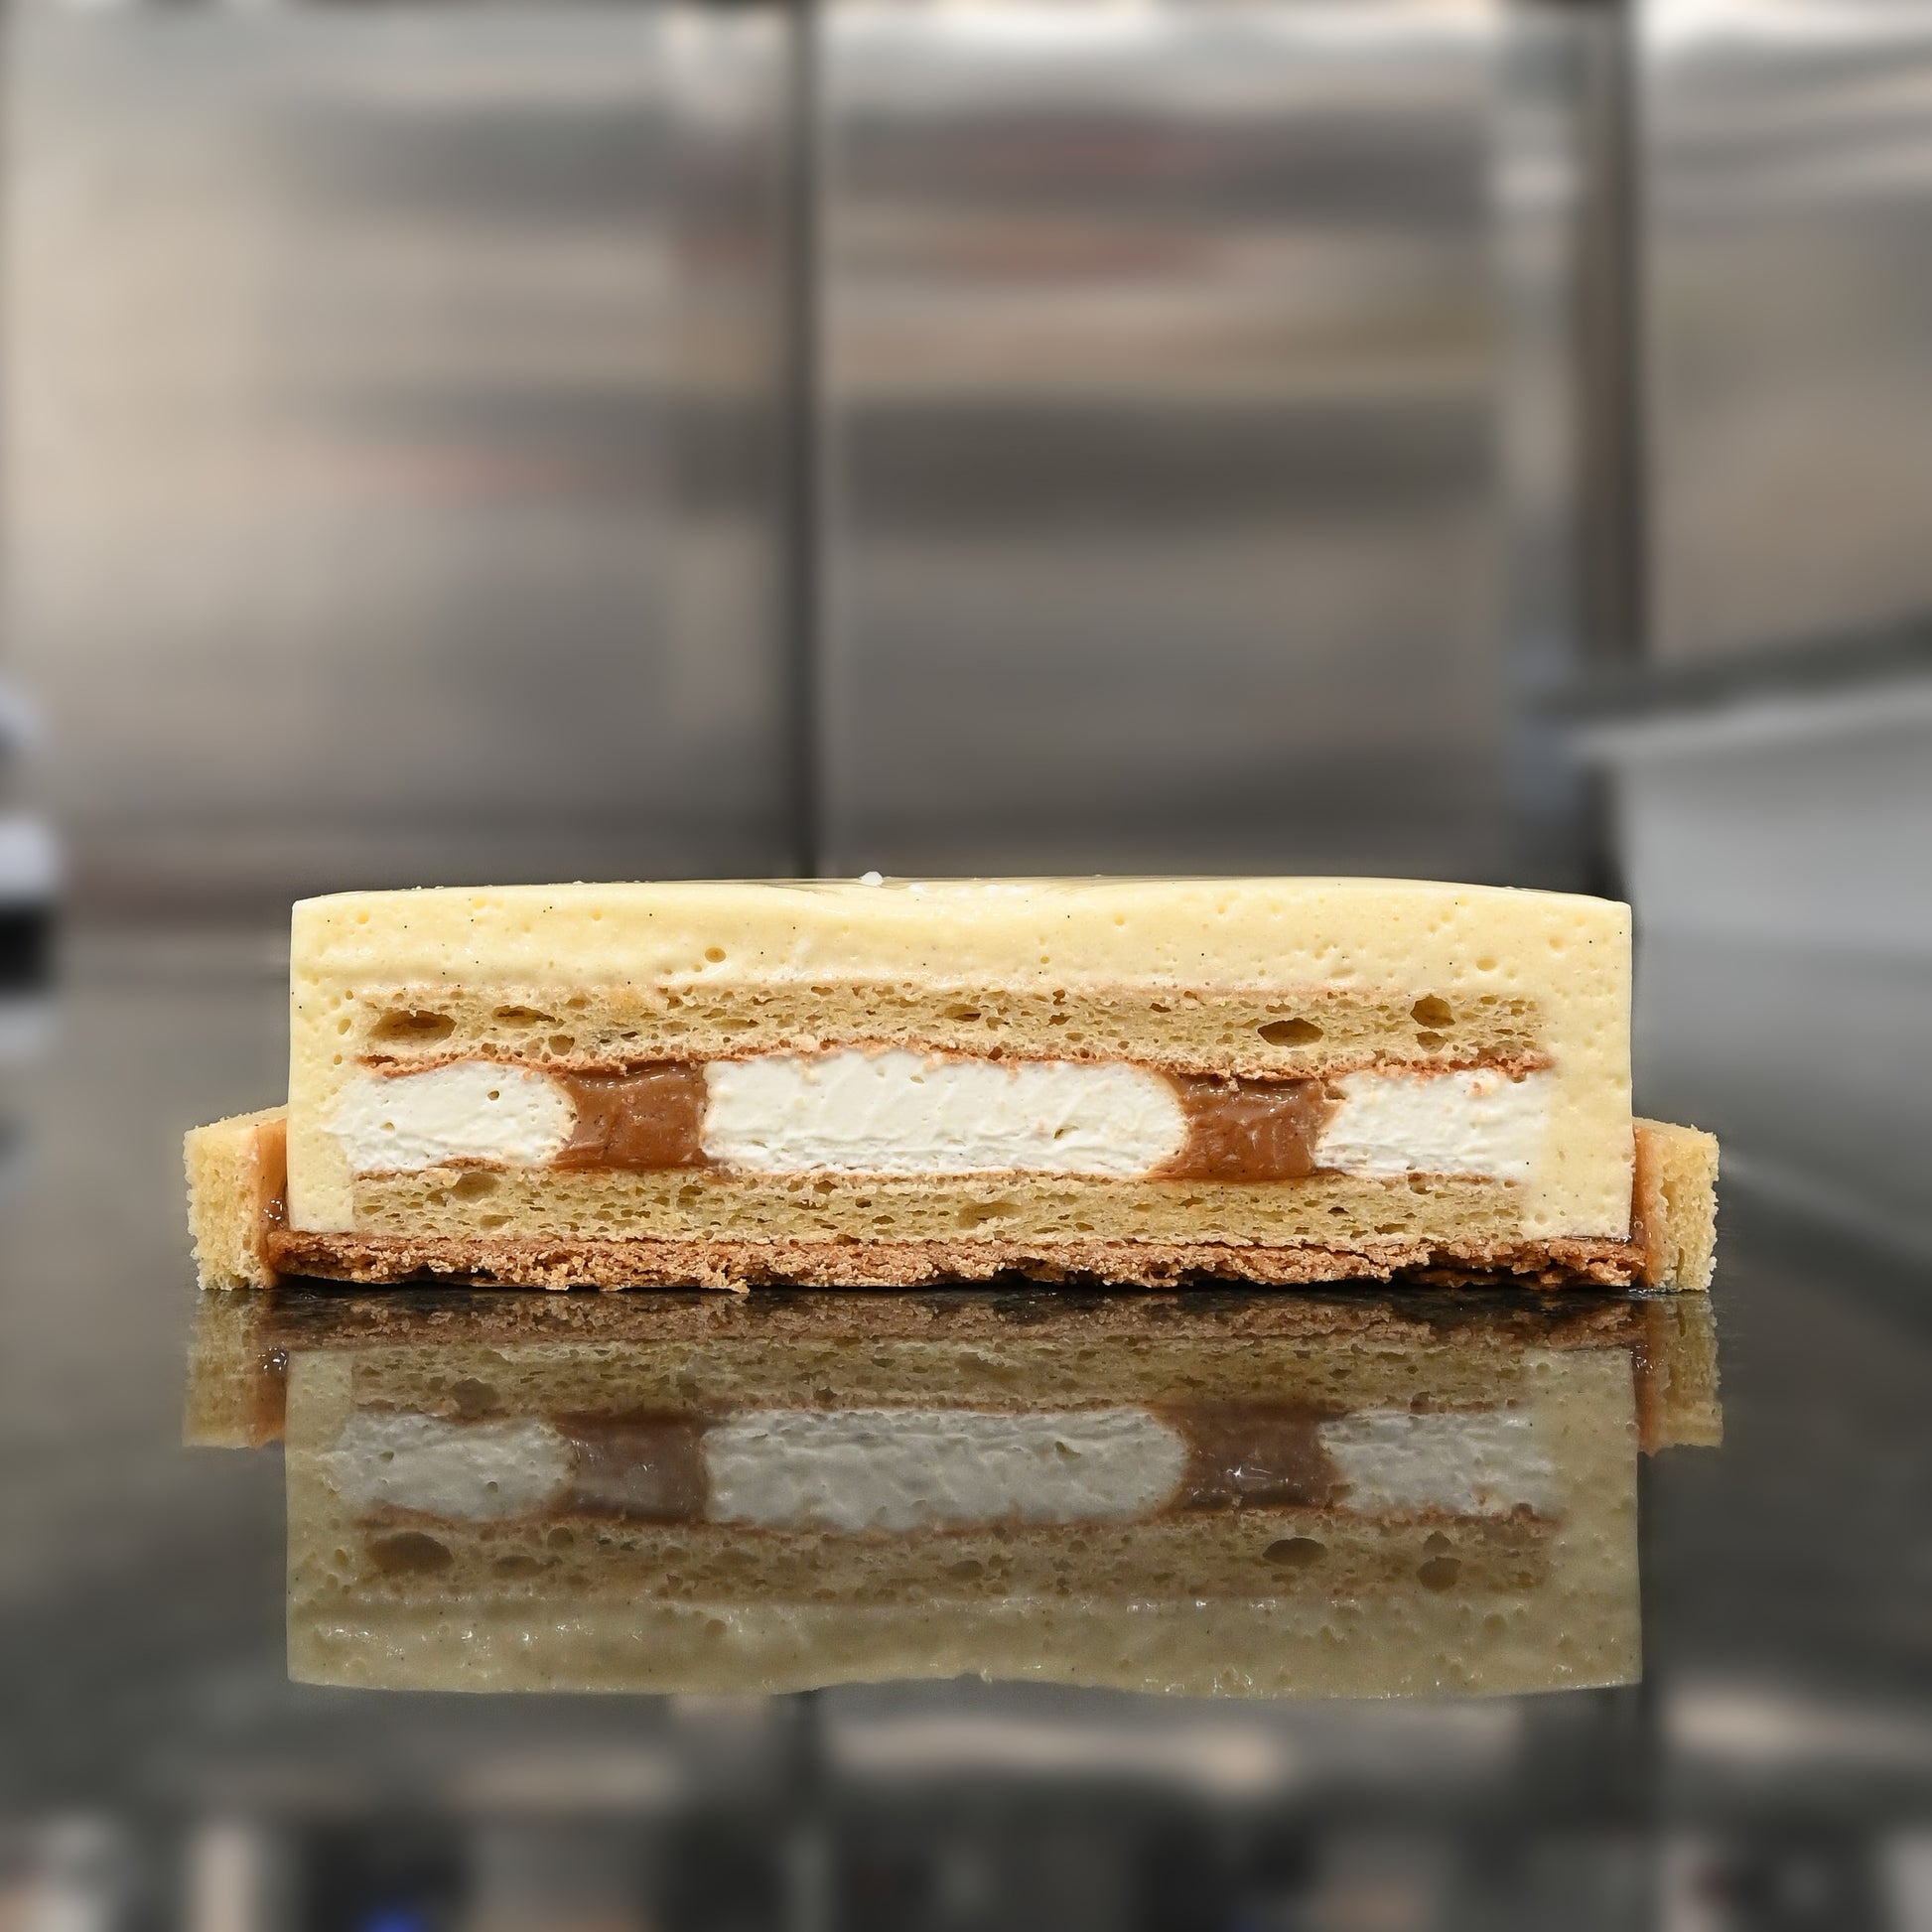 Vanilla Cake Cross Section - Layers of vanilla biscuit, caramel, sablé, and chiboust, creating a variety of textures and flavors in every bite.